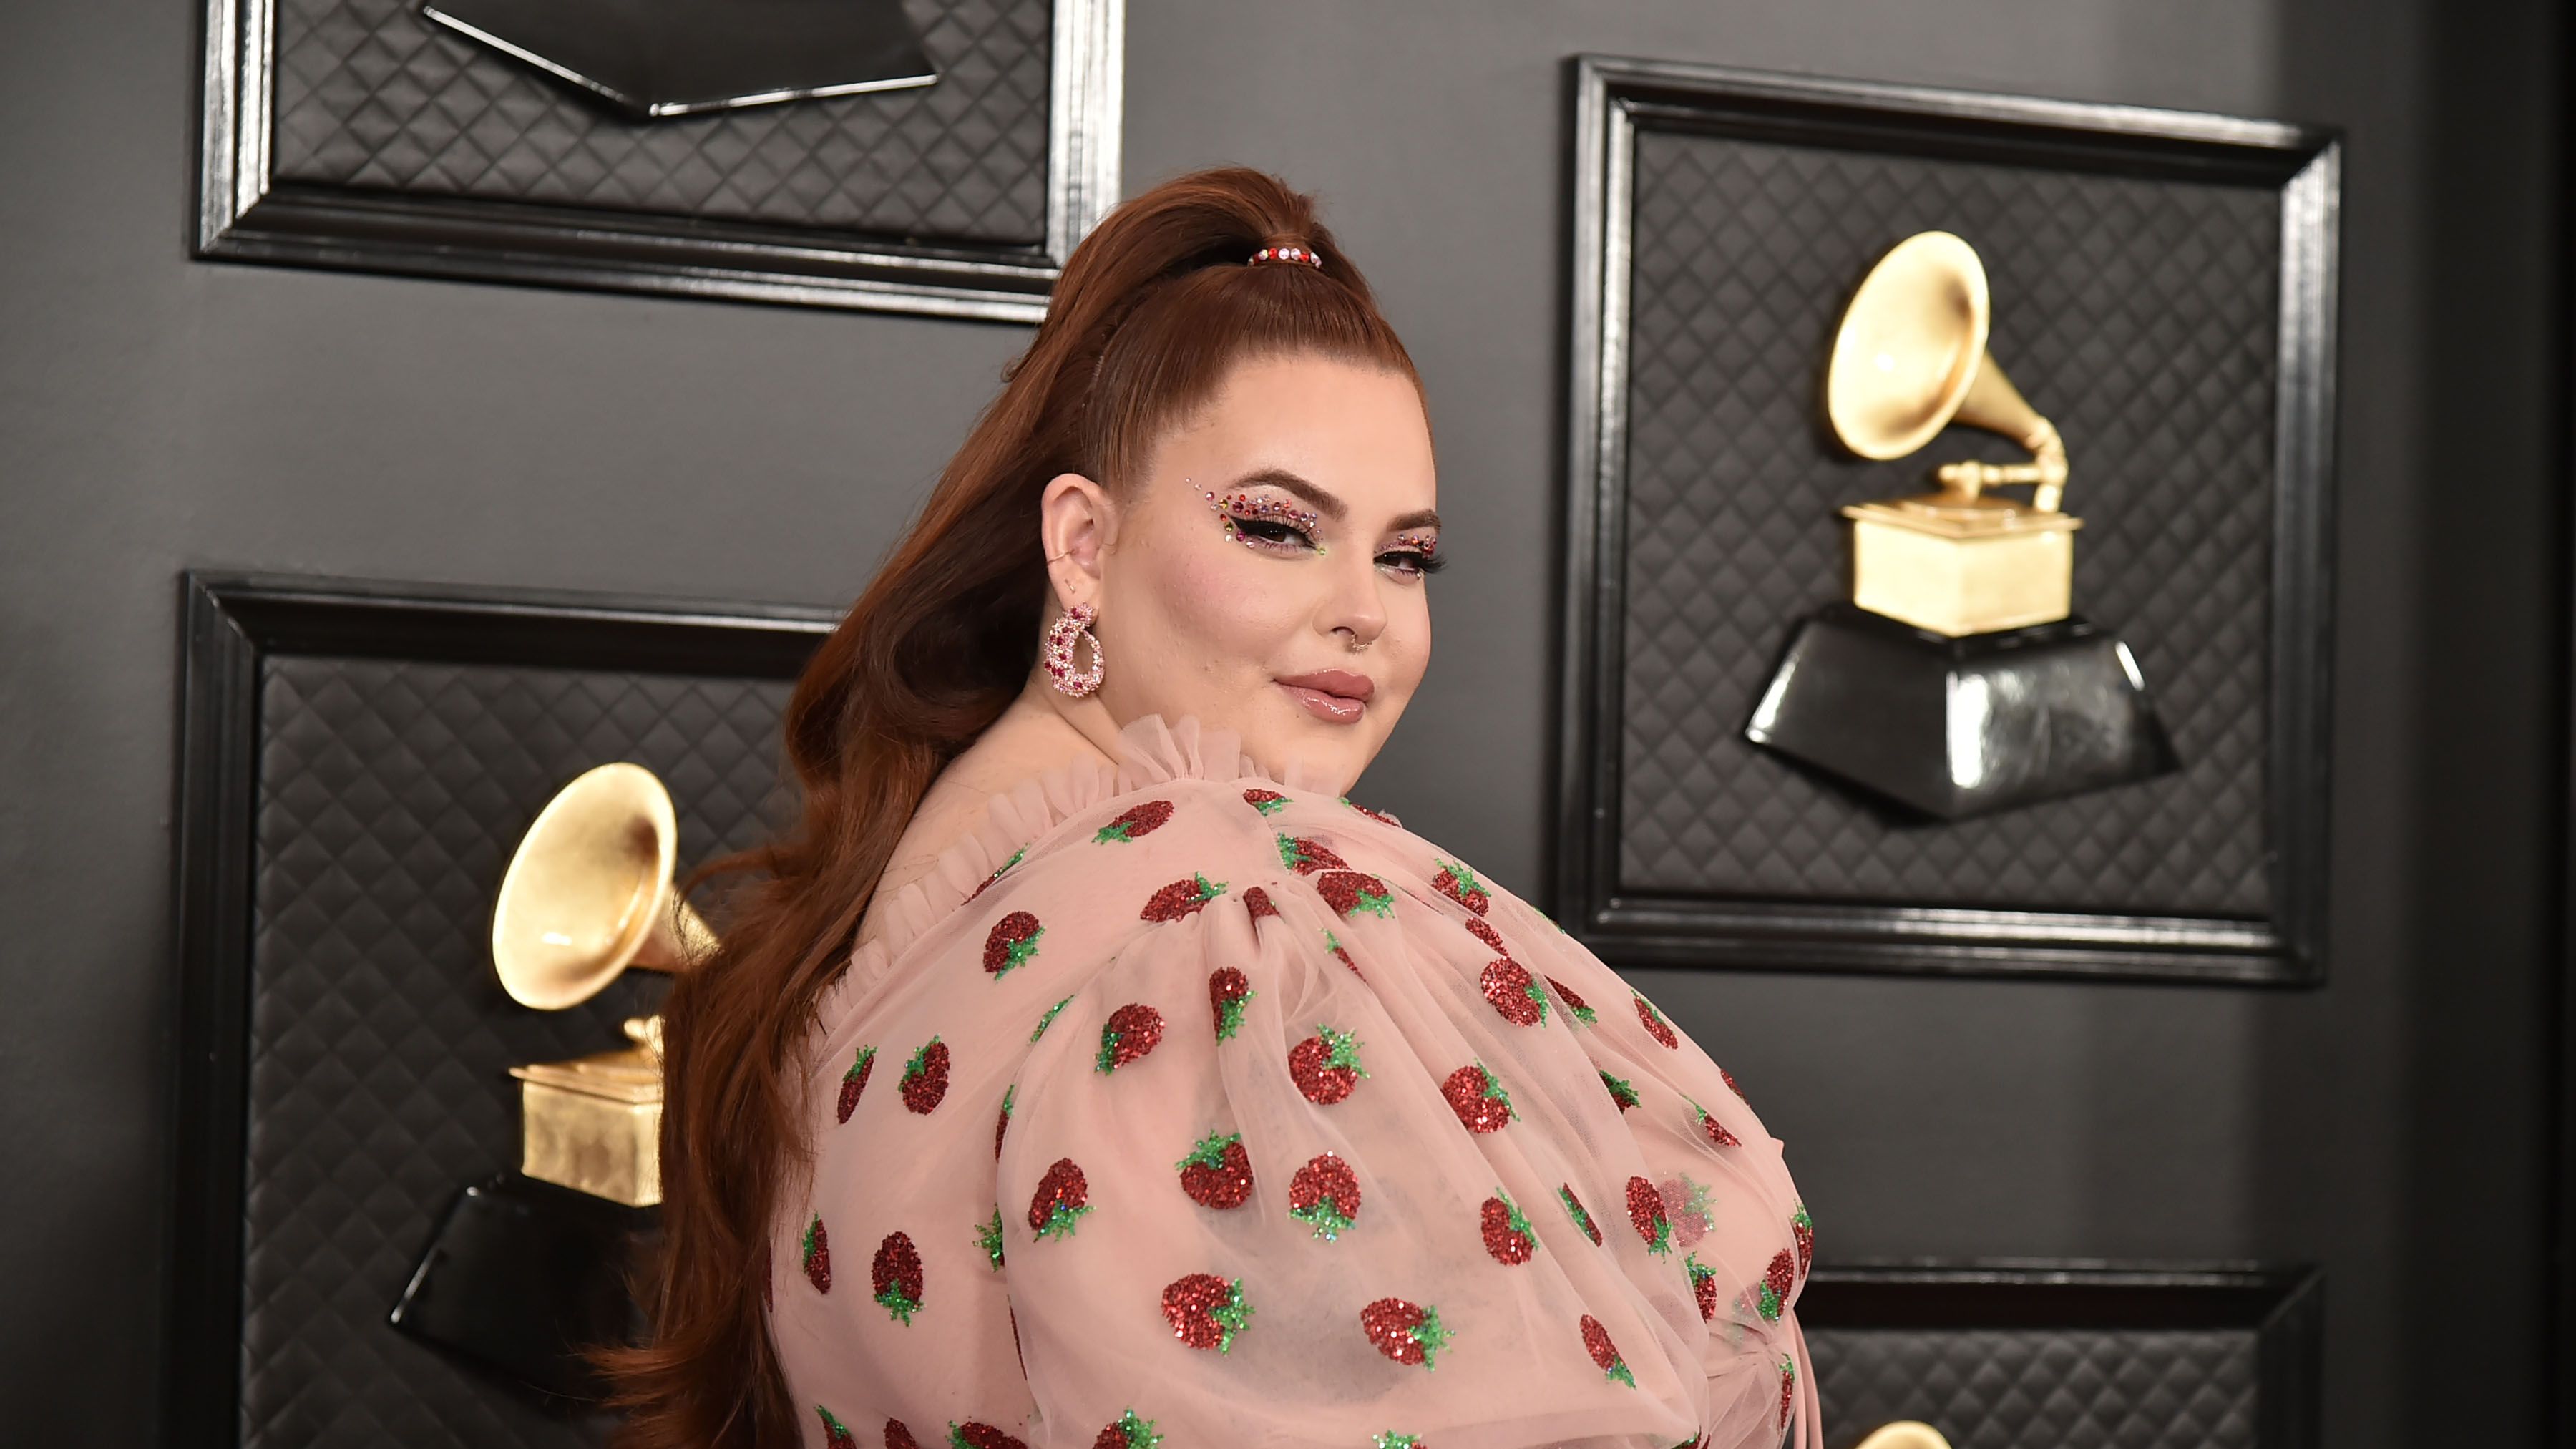 https://hips.hearstapps.com/hmg-prod/images/tess-holliday-attends-the-62nd-annual-grammy-awards-at-news-photo-1620390909.?crop=1xw:0.84375xh;center,top